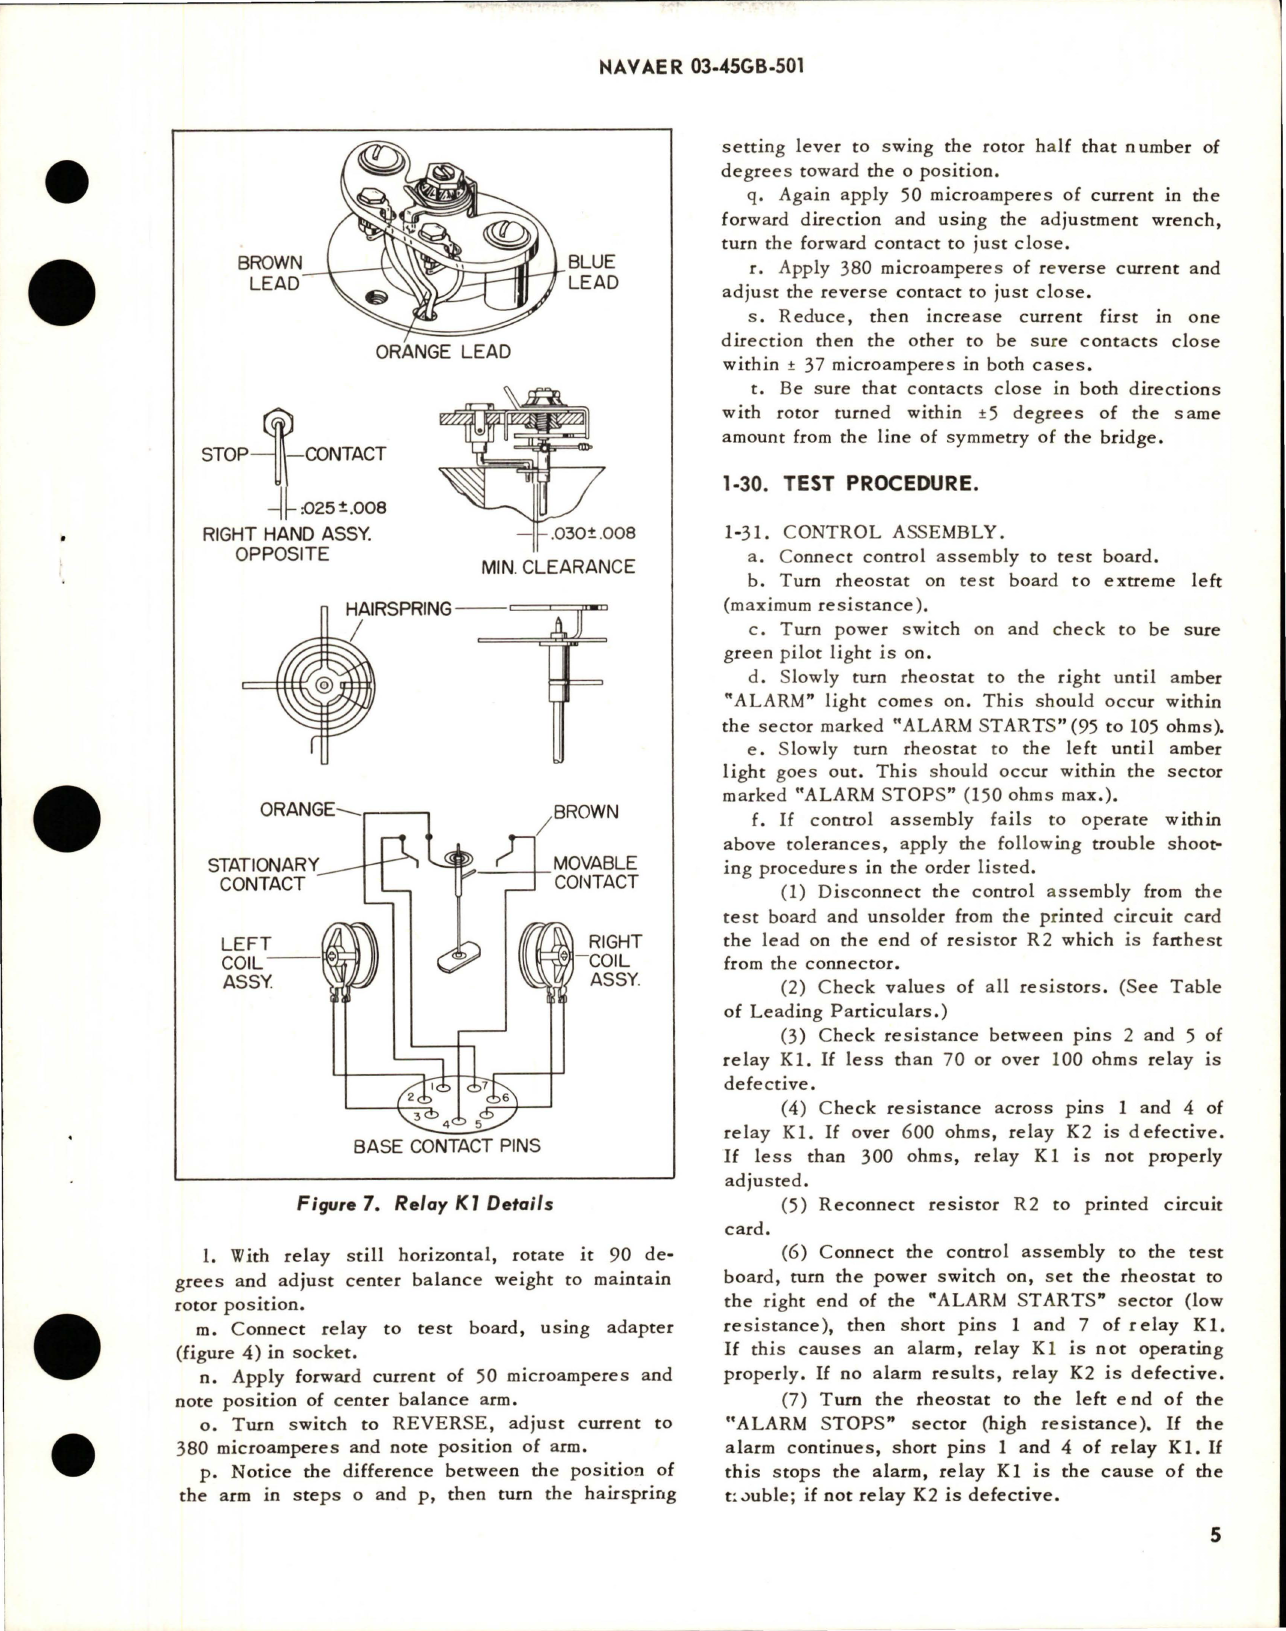 Sample page 5 from AirCorps Library document: Overhaul Instructions with Parts Breakdown for Fire Detection Control Assembly - 227-28-2 